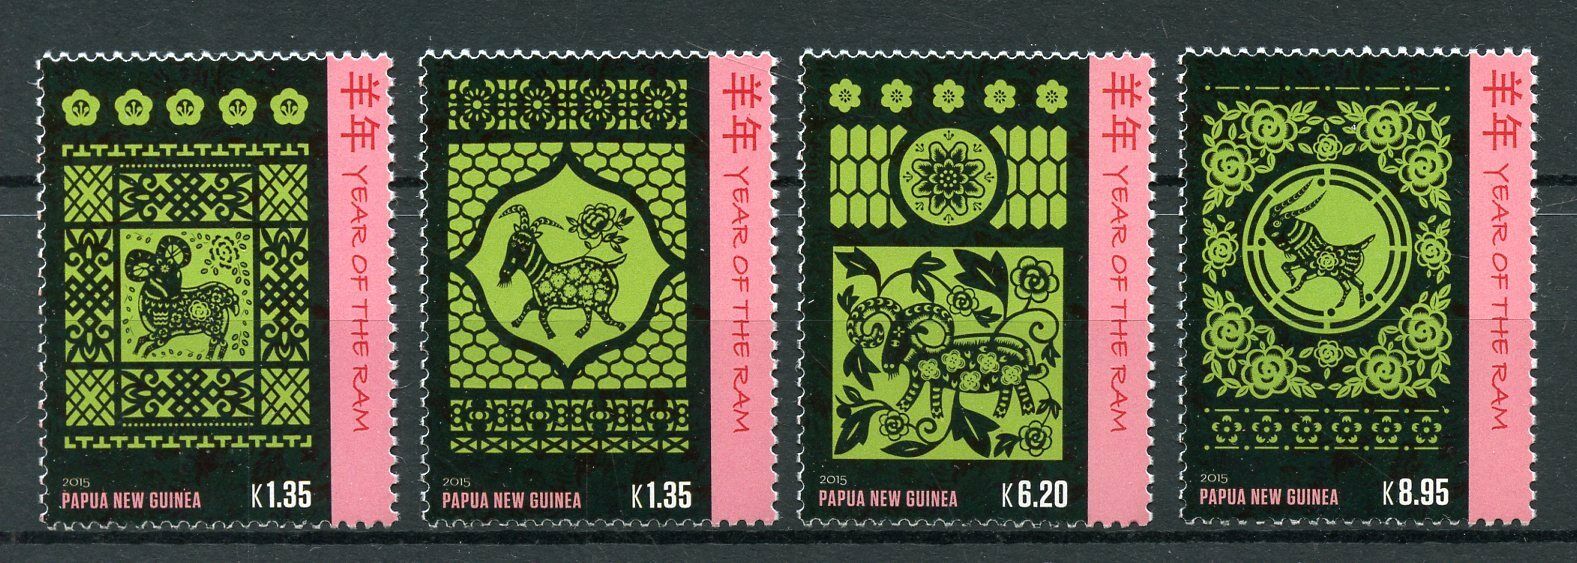 Papua New Guinea 2015 MNH Year of Ram 4v Chinese Set Lunar New Year Stamps